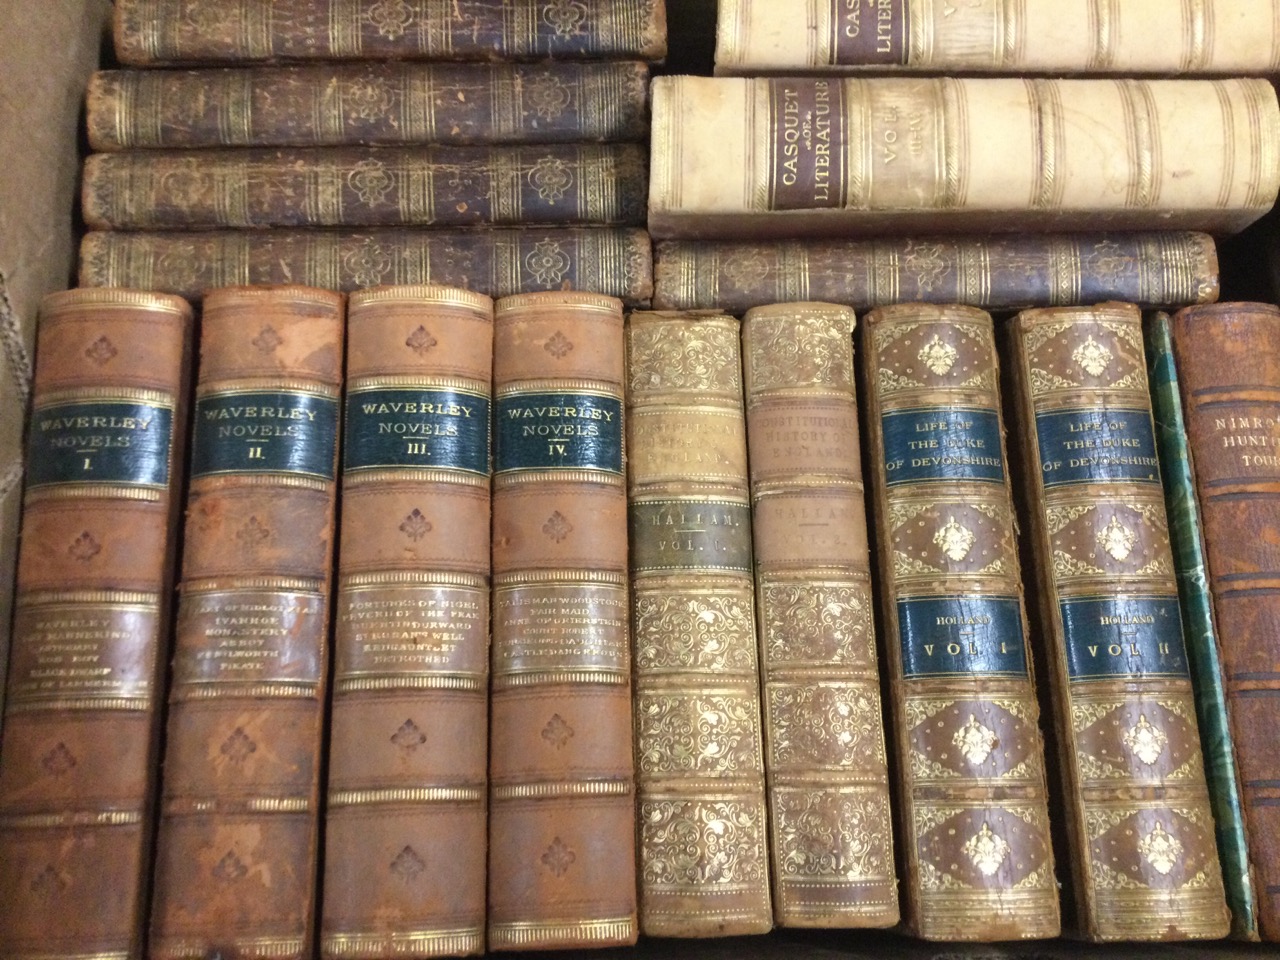 Leather bound books: Waverley Novels published in 1877 in four volumes; Constitutional History of